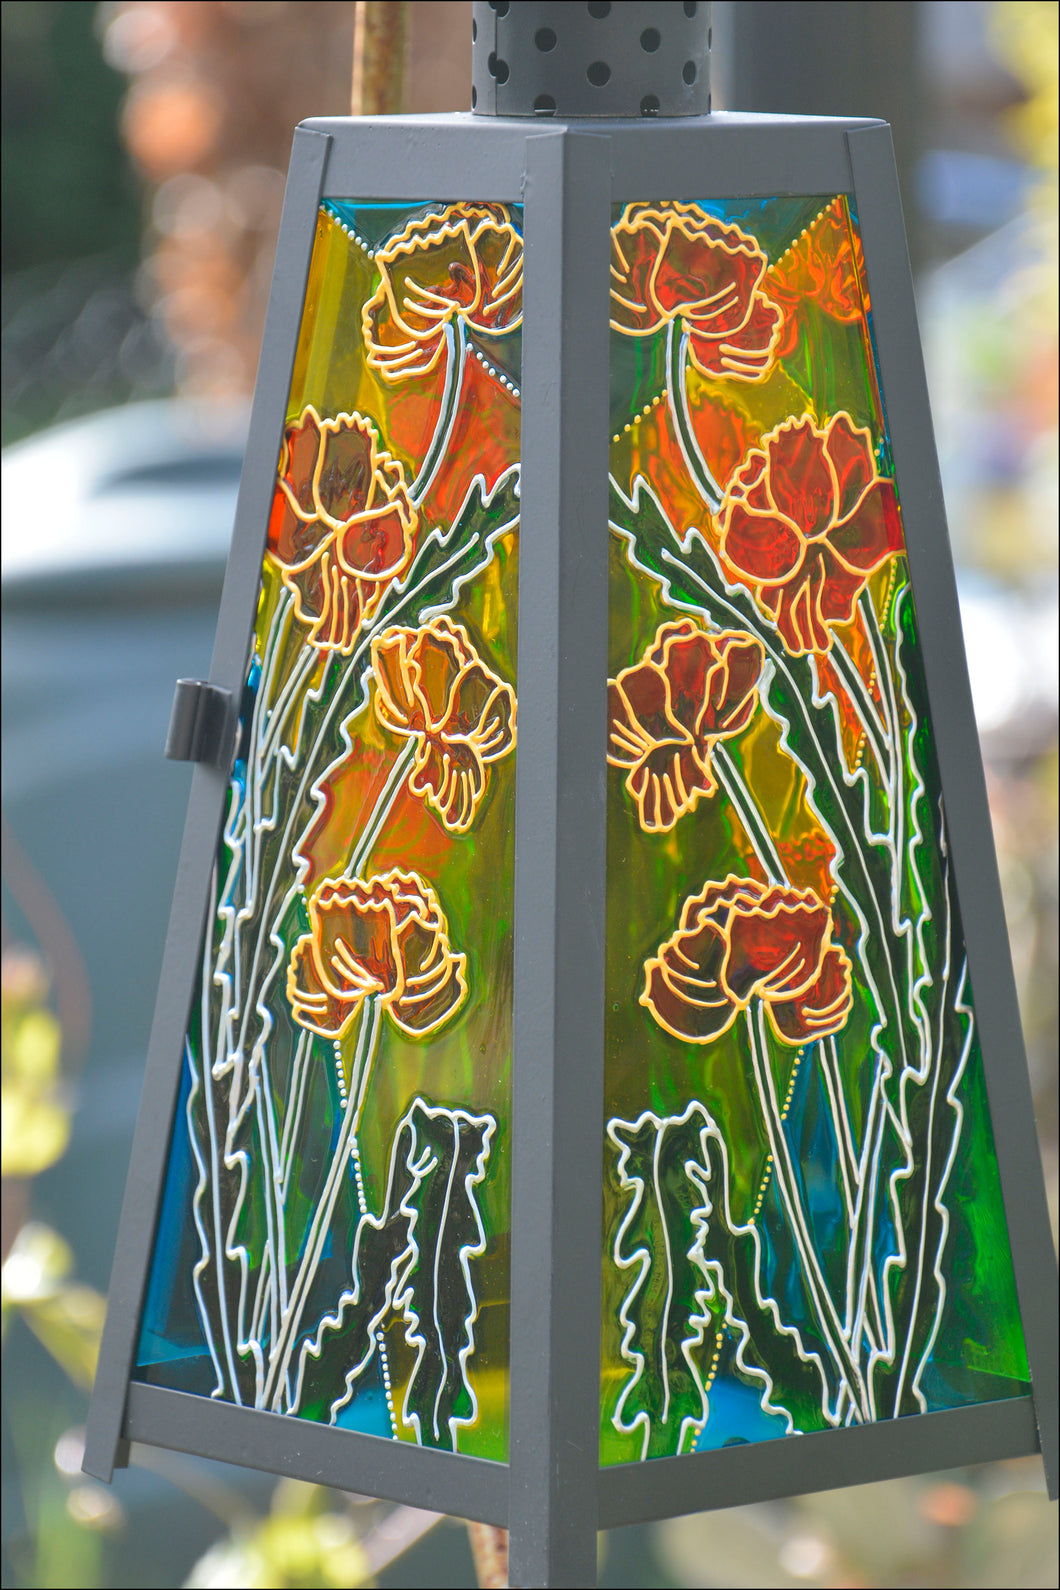 Red & gold California poppies are hand painted in sunshine on panels of a stained glass candle lantern by Ornately Lanterns